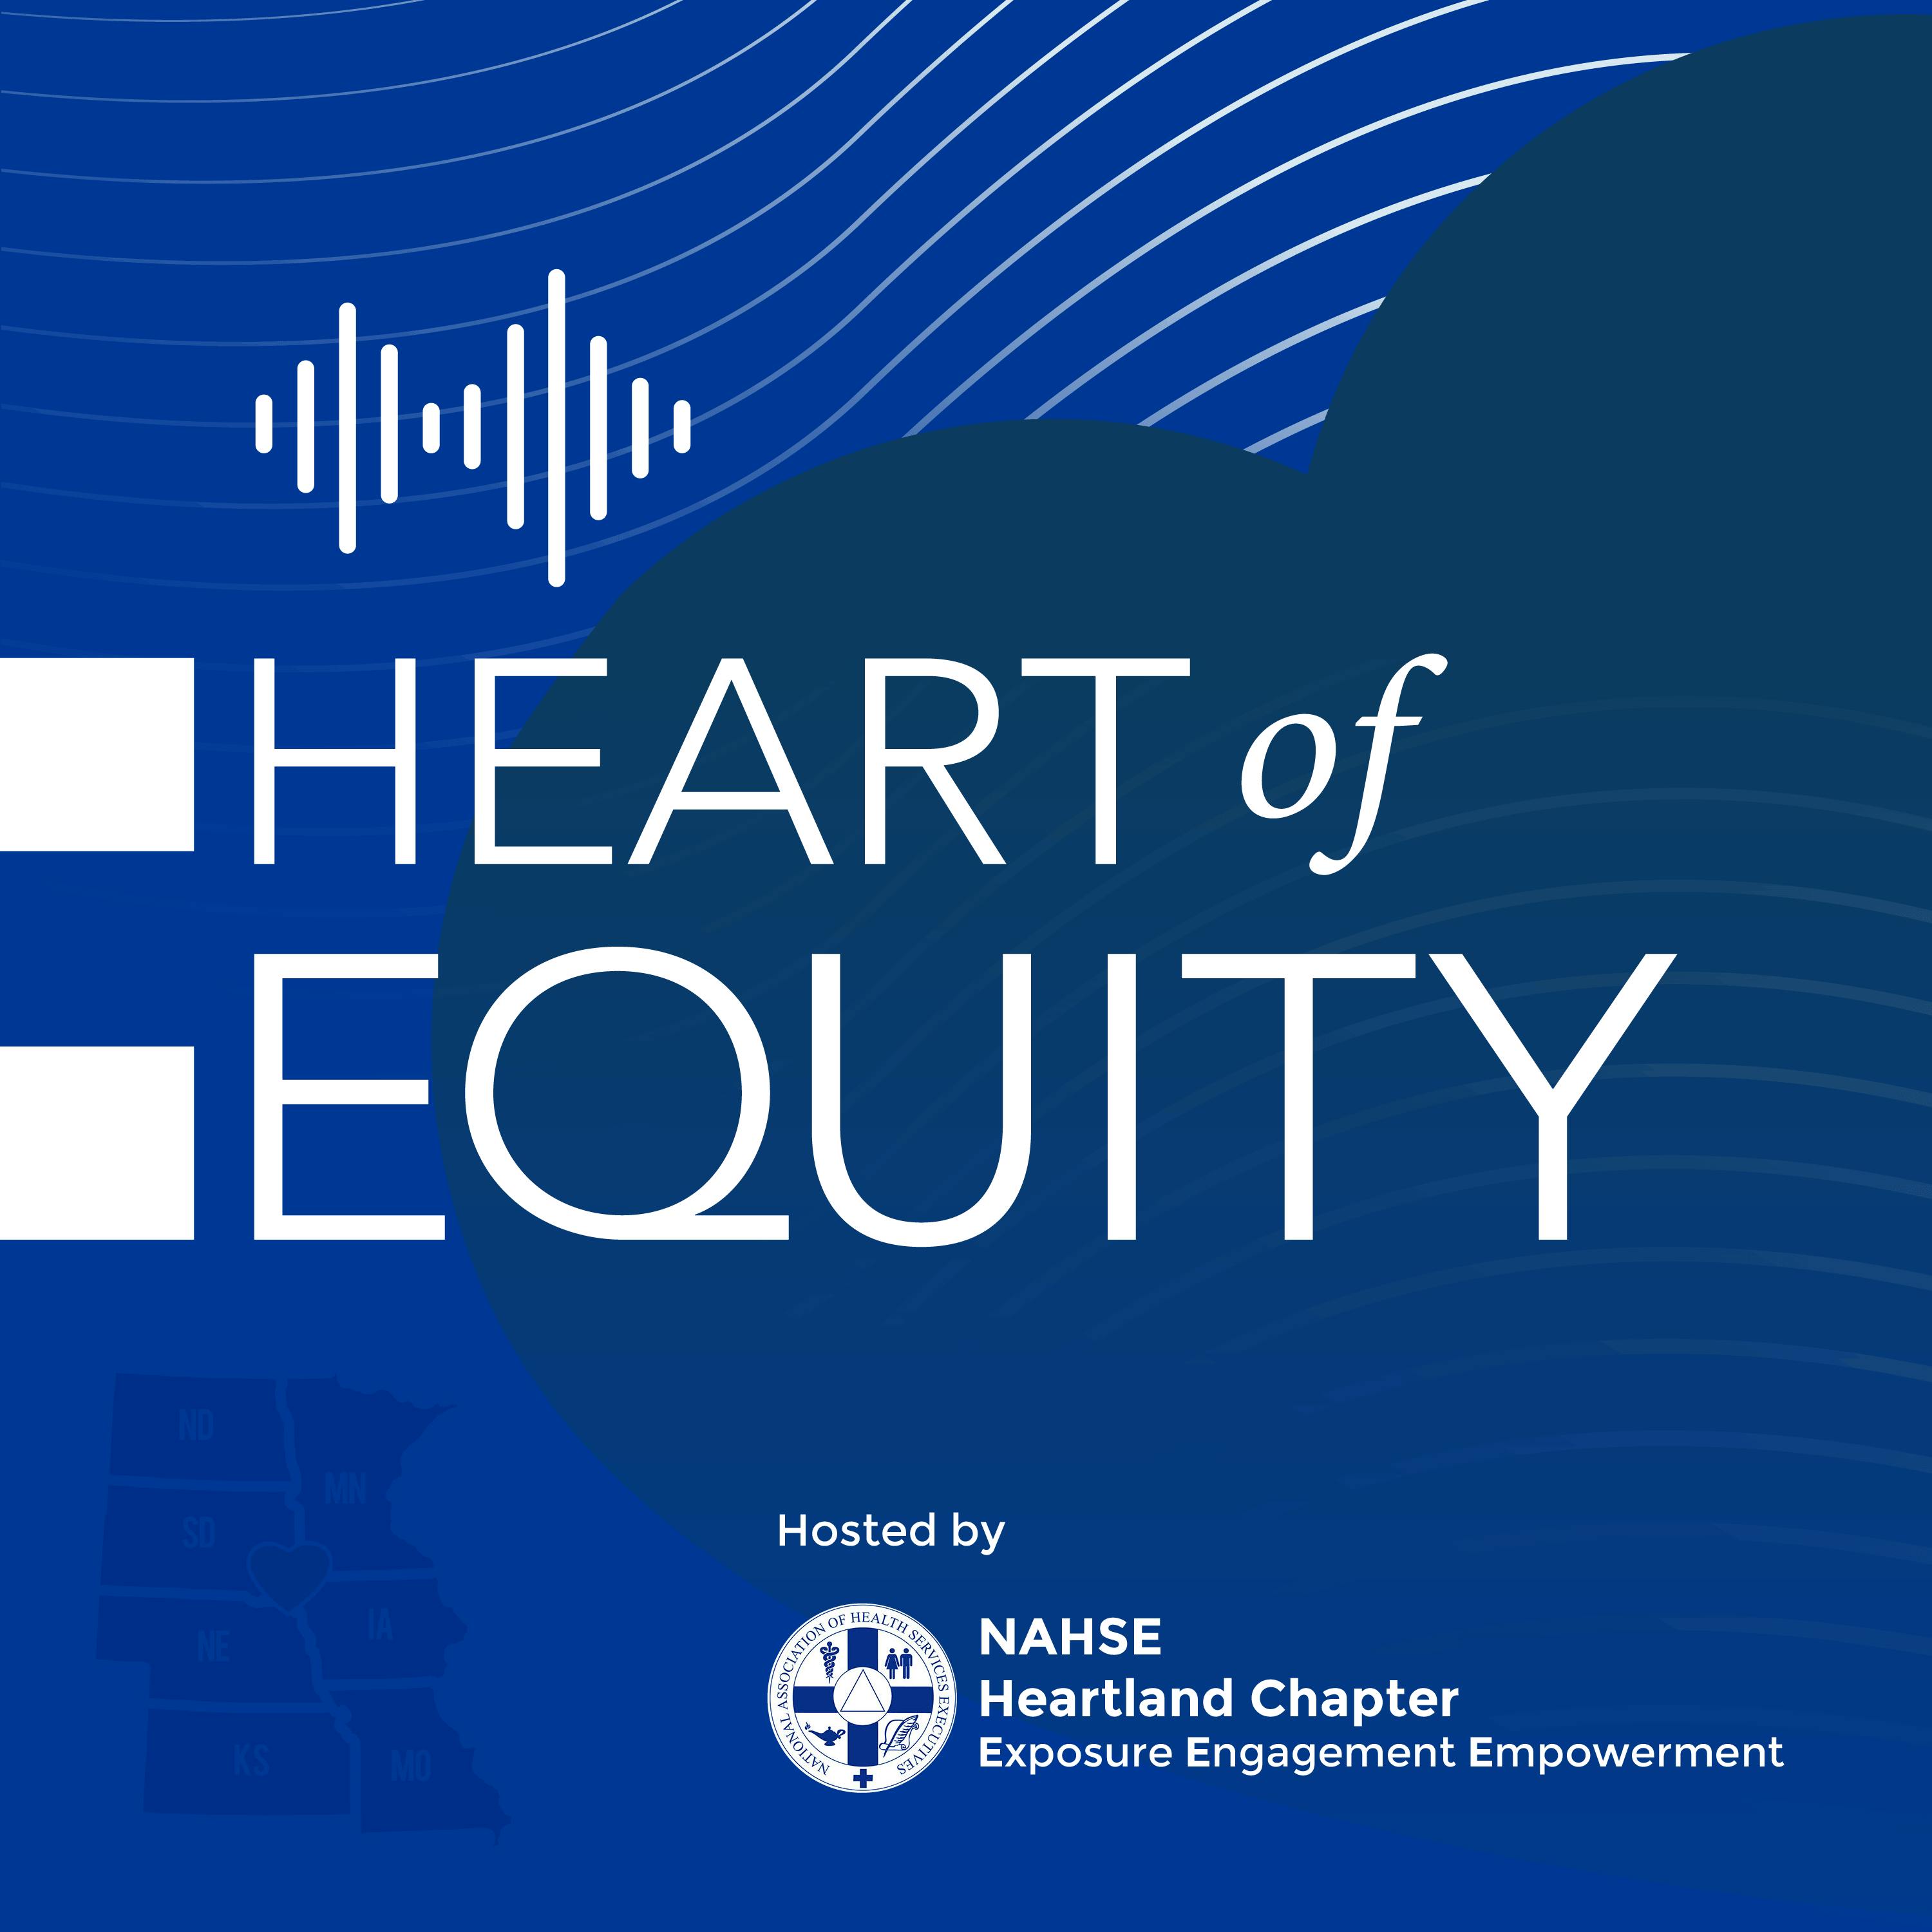 In Case You Missed It: A Recap of Health Equity on Heart of Equity